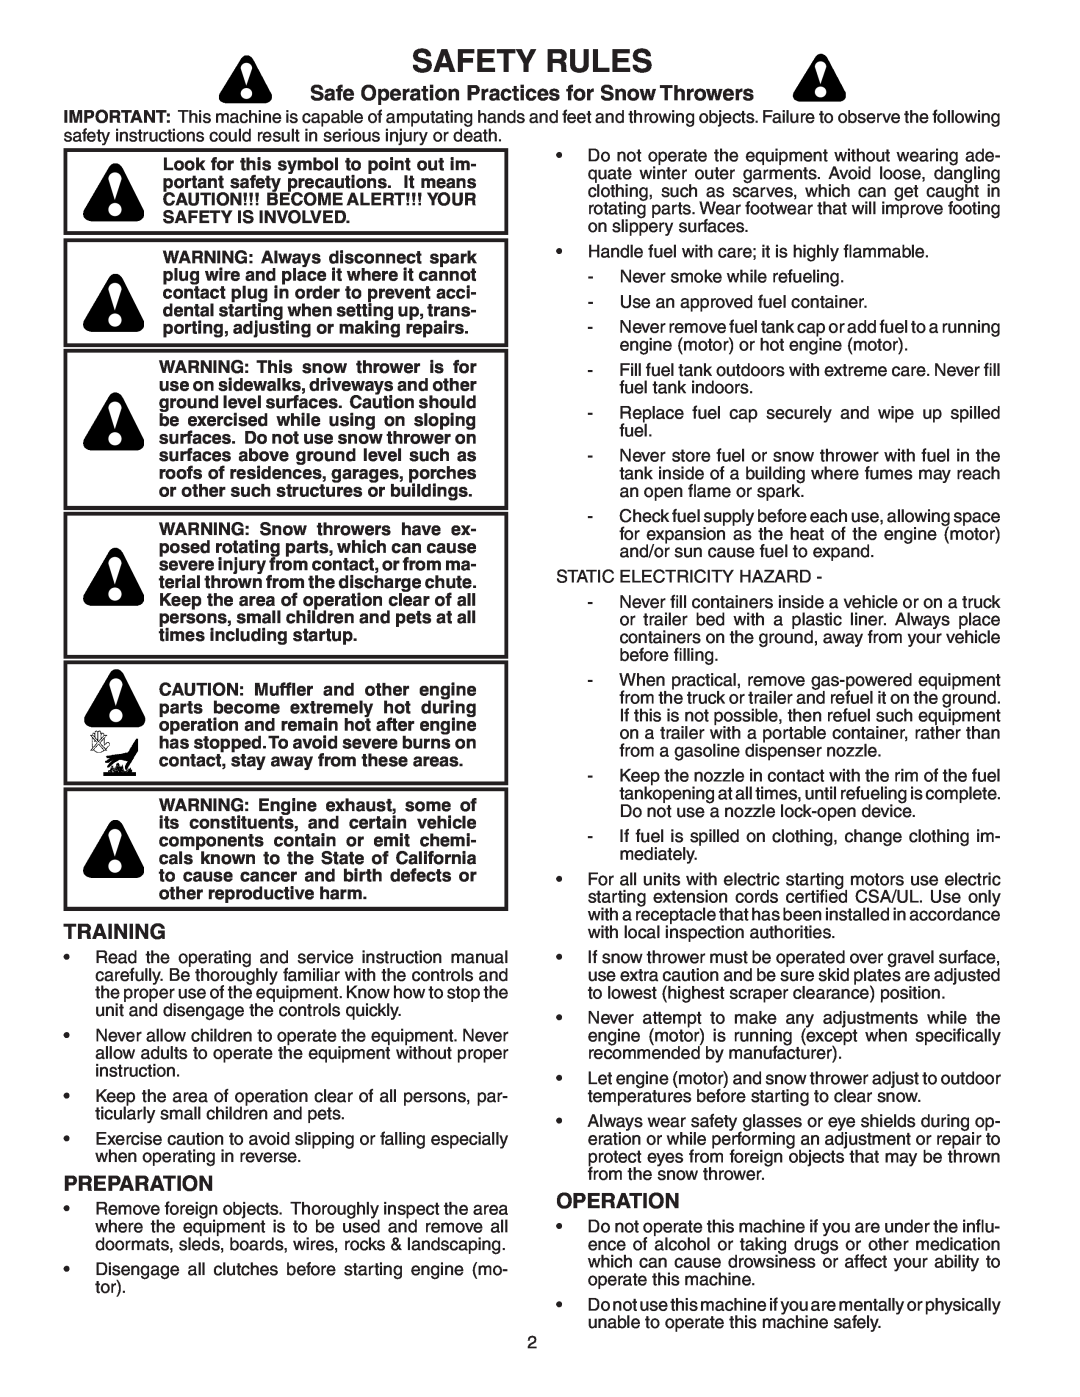 Poulan PP8527ESA owner manual Safety Rules, Safe Operation Practices for Snow Throwers, Training, Preparation 